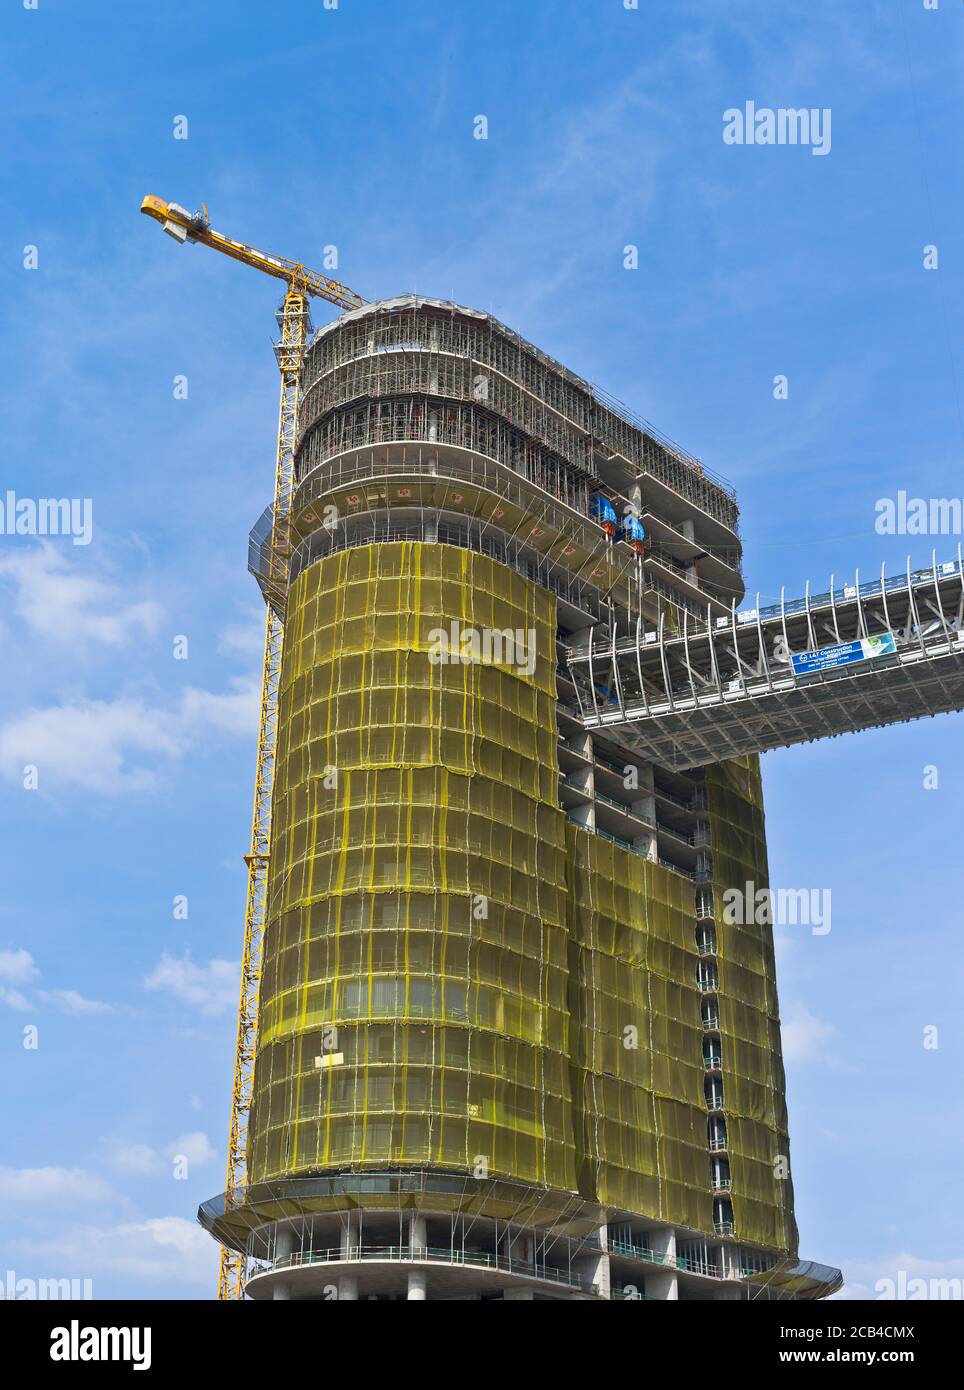 dh ITC Colombo One Towers COLOMBO CITY SRI LANKA Multi storey building under construction buildings Stock Photo